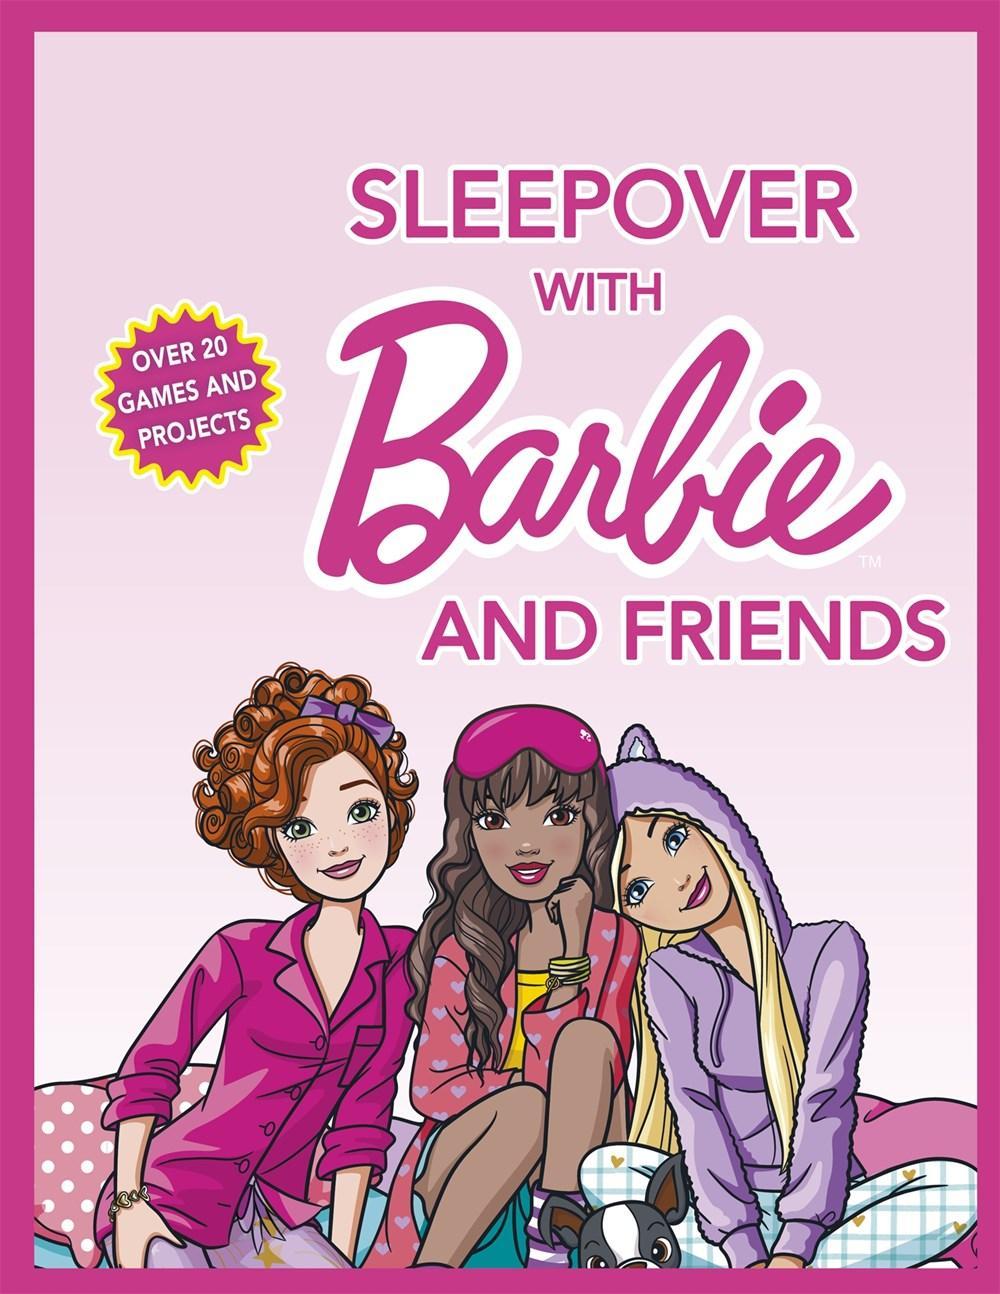 EDDA USA APRIL 2017 Sleepover With Barbie and Friends Plan an unforgettable sleepover party with the help of Barbie and friends Edda USA 4/11/2017 9781940787855 $5.